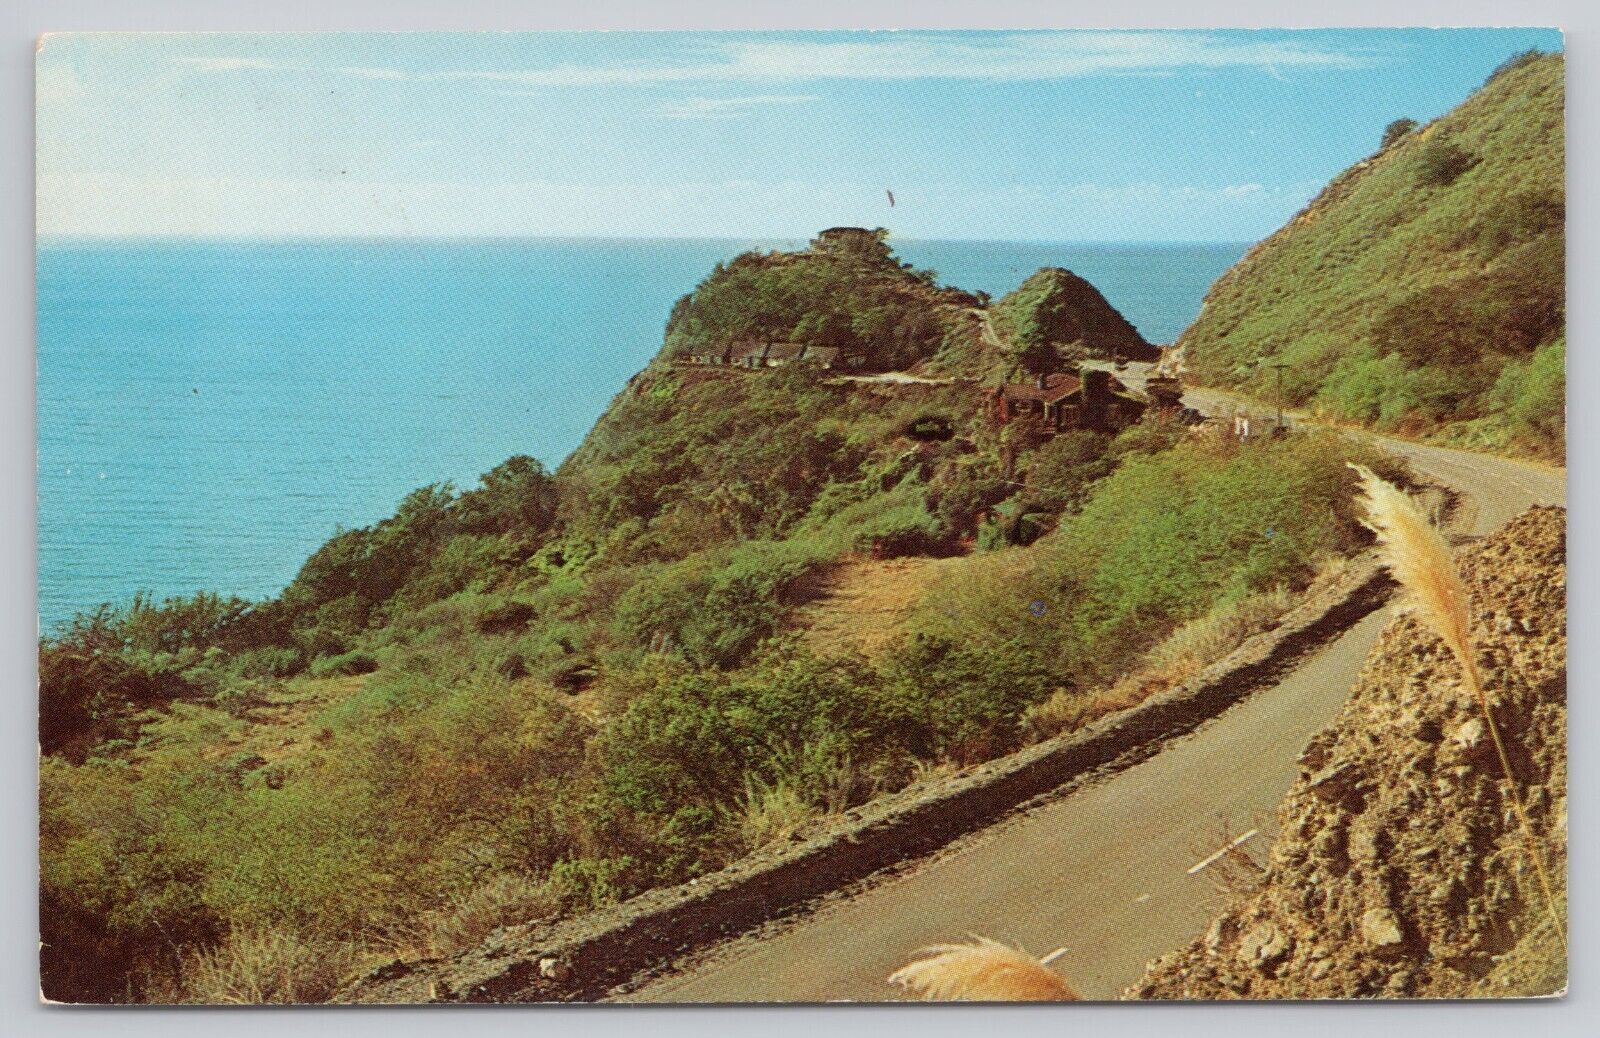 Big Sur California, Lucia Lodge Highway 1 Scenic View, Vintage Postcard